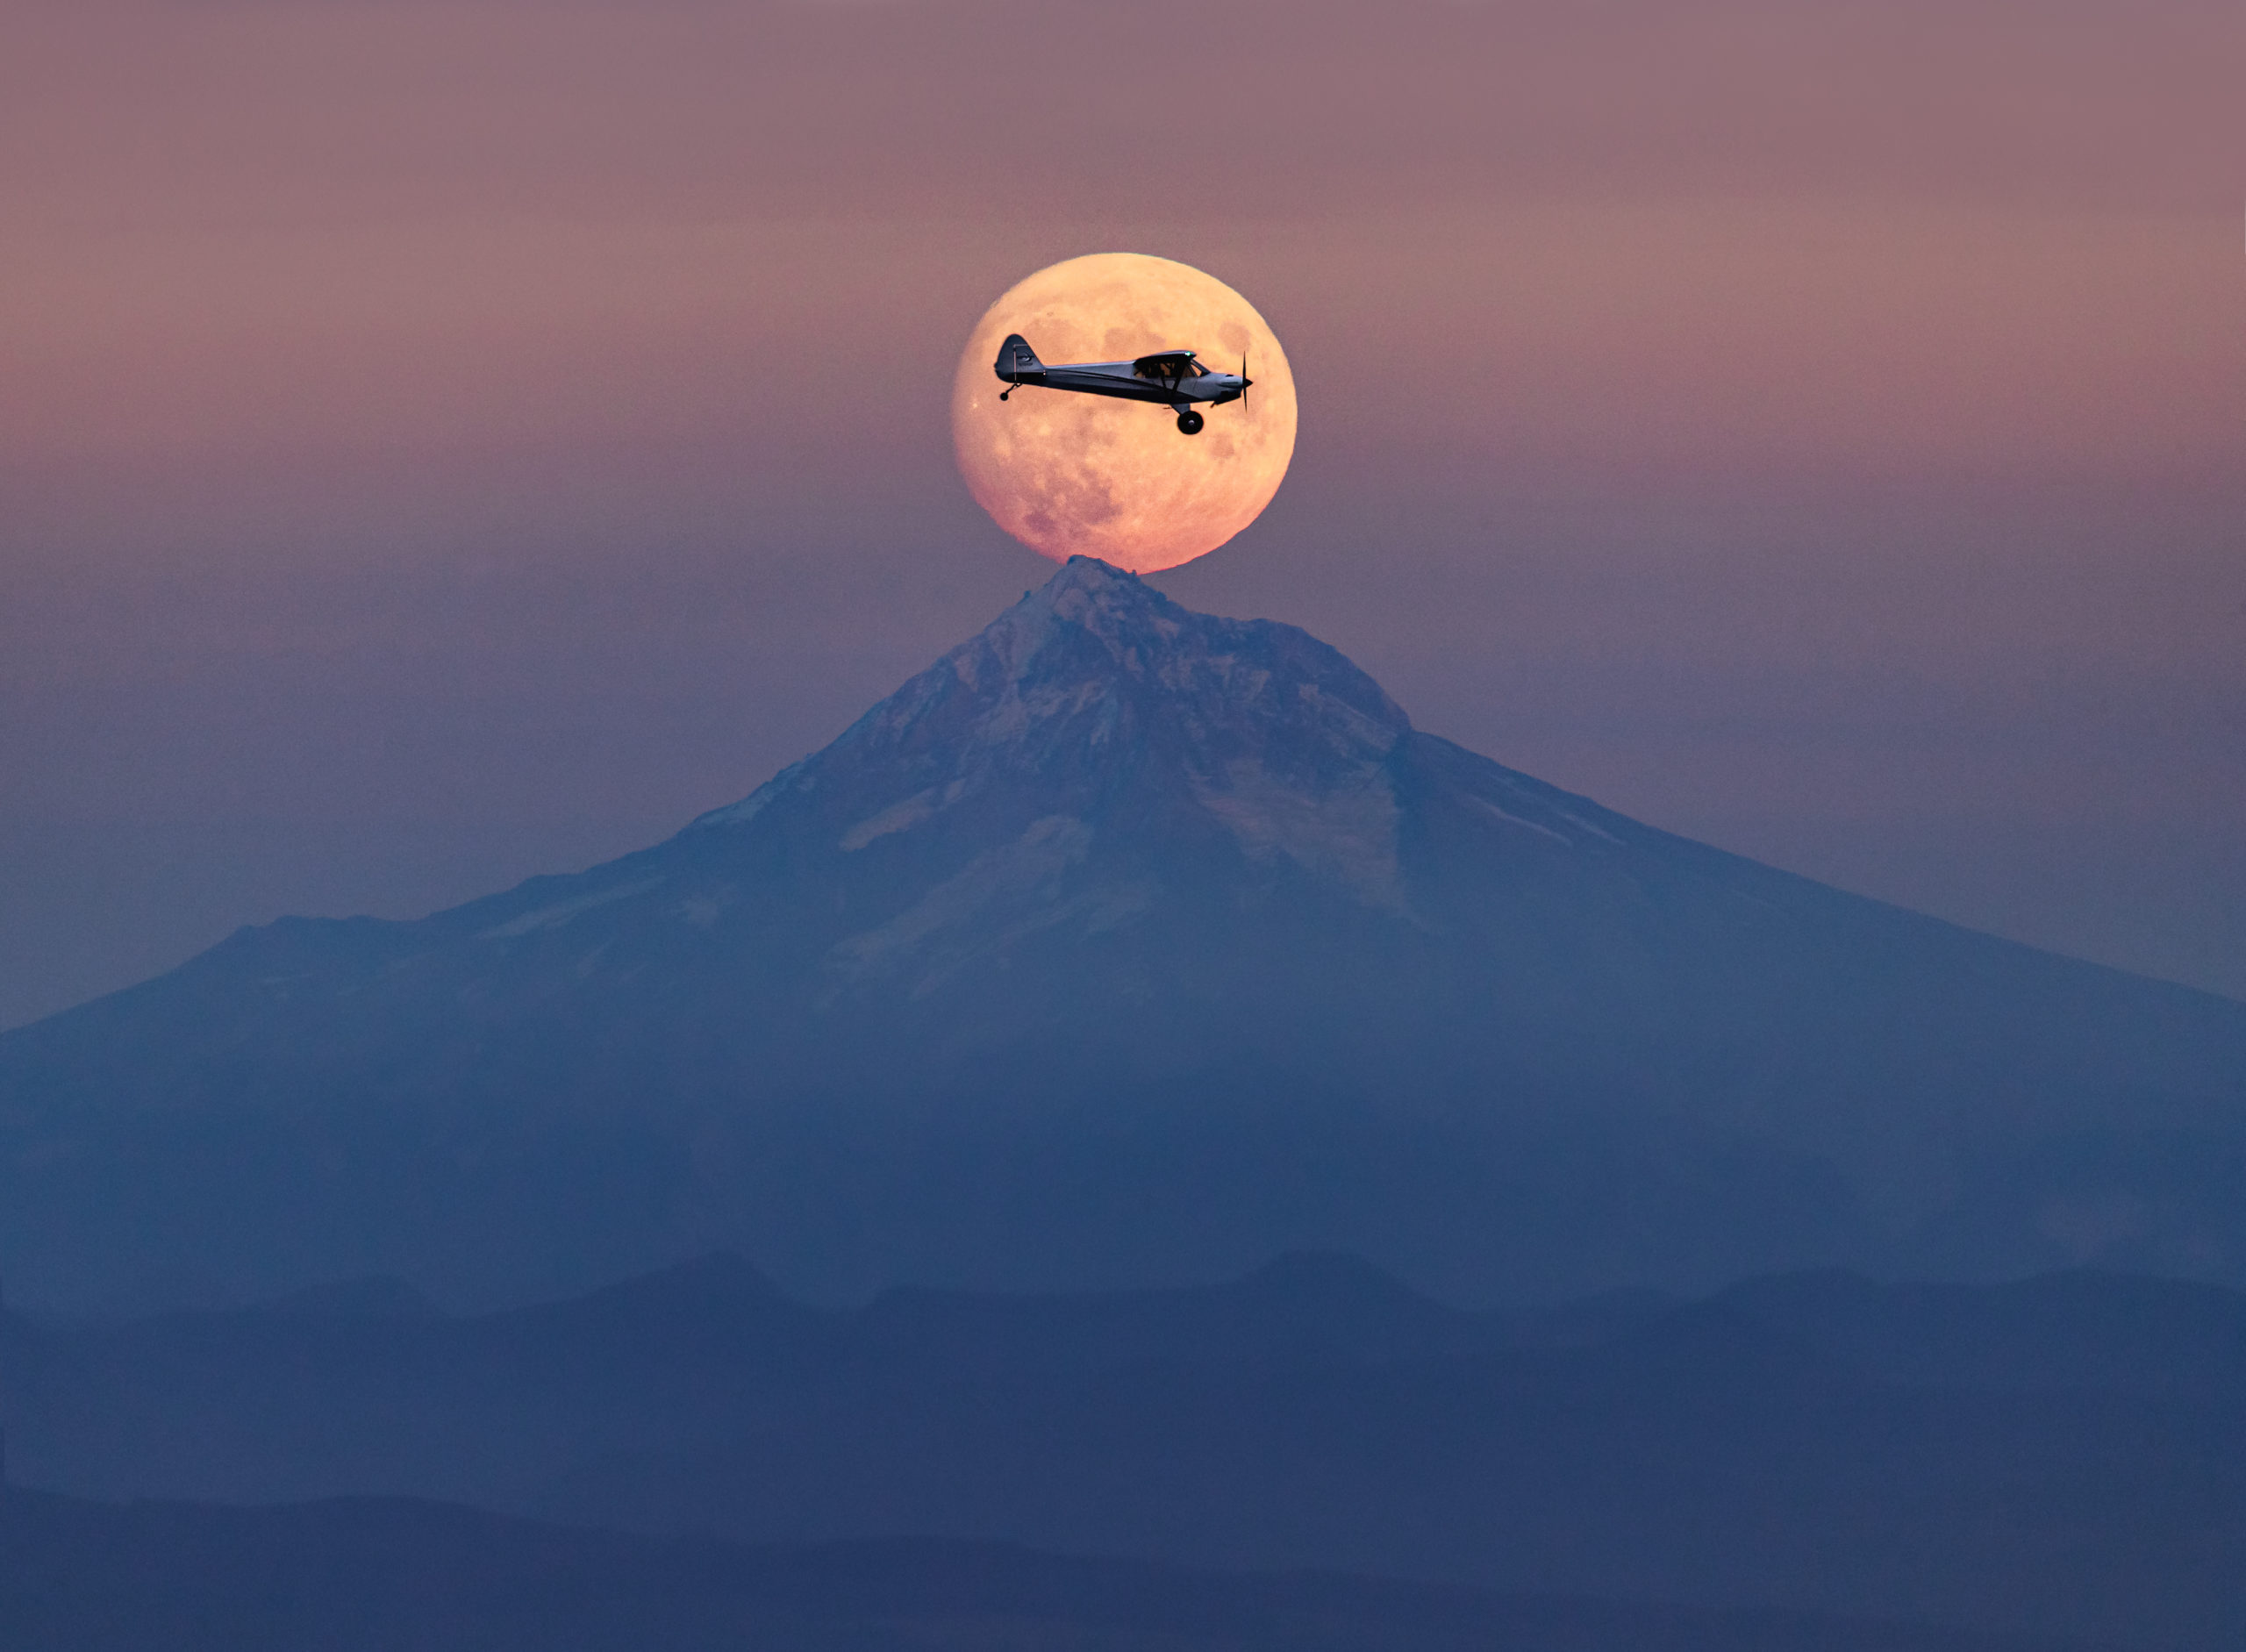 Aviation landscape photography of an airplane within the rising full moon over Mount Hood, Oregon. Single image, no photoshop.